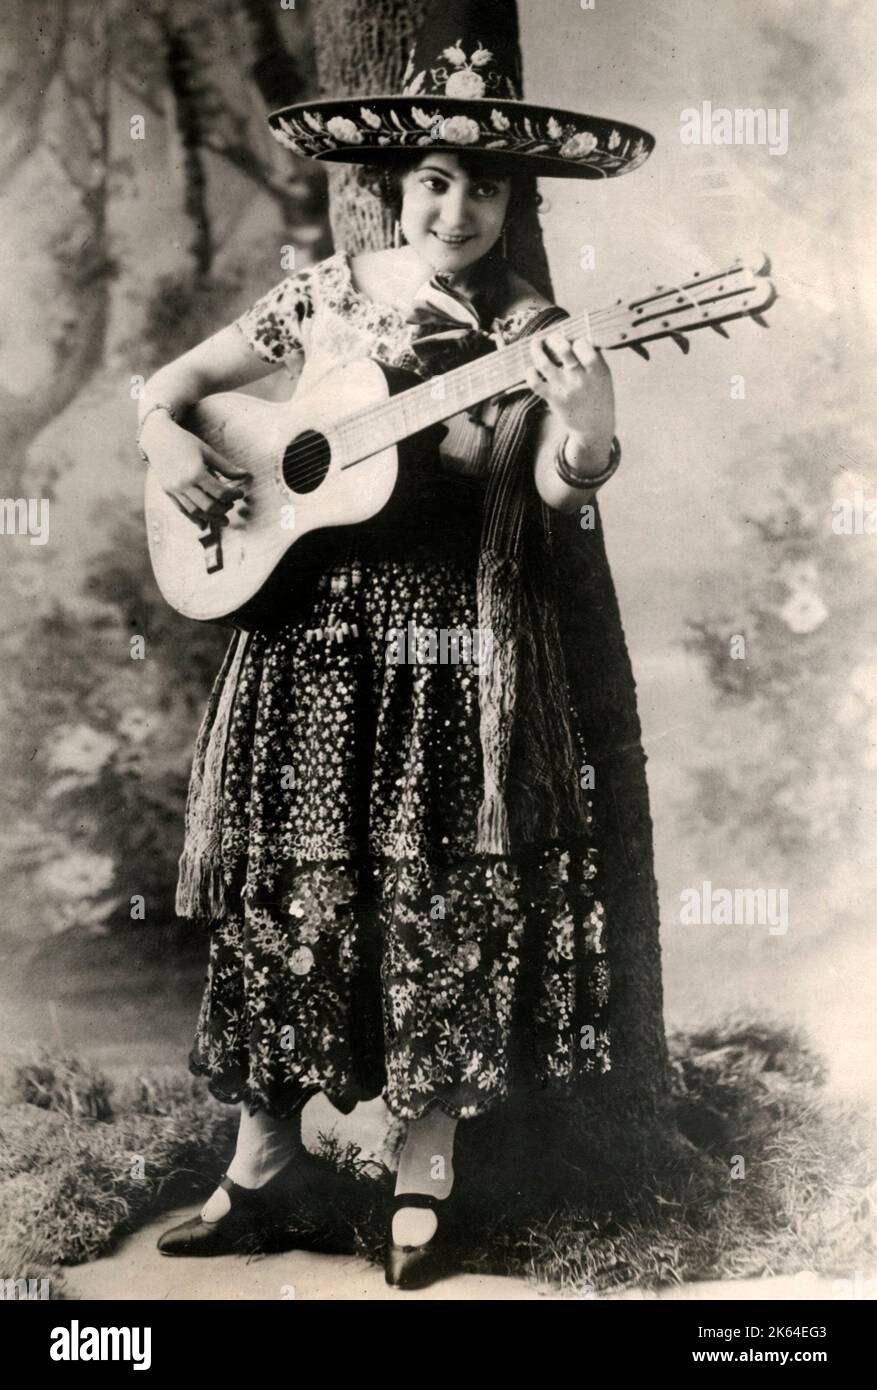 Early 20th century vintage press photograph - María Conesa, also known as La Gatita Blanca (The White Kitten) (December 12, 1892 – September 9, 1978), was a Spanish-born Mexican stage, television, film actress and vedette. She was one of the principal stars of the Revue and Vaudeville in México and Latin America in the early 20th century. Stock Photo